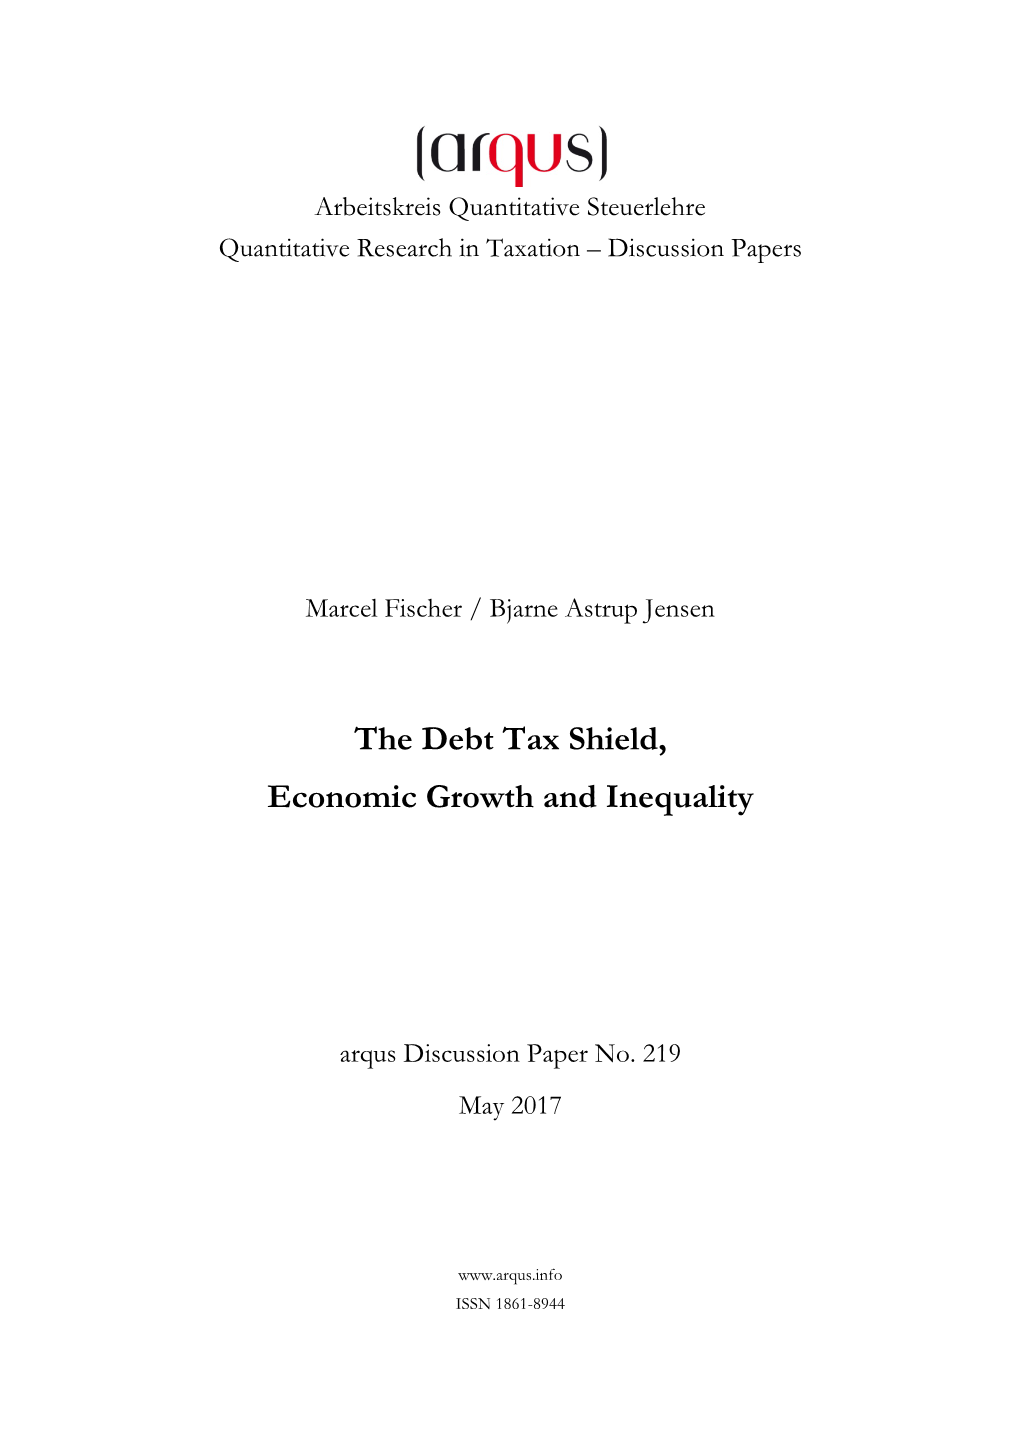 The Debt Tax Shield, Economic Growth and Inequality∗